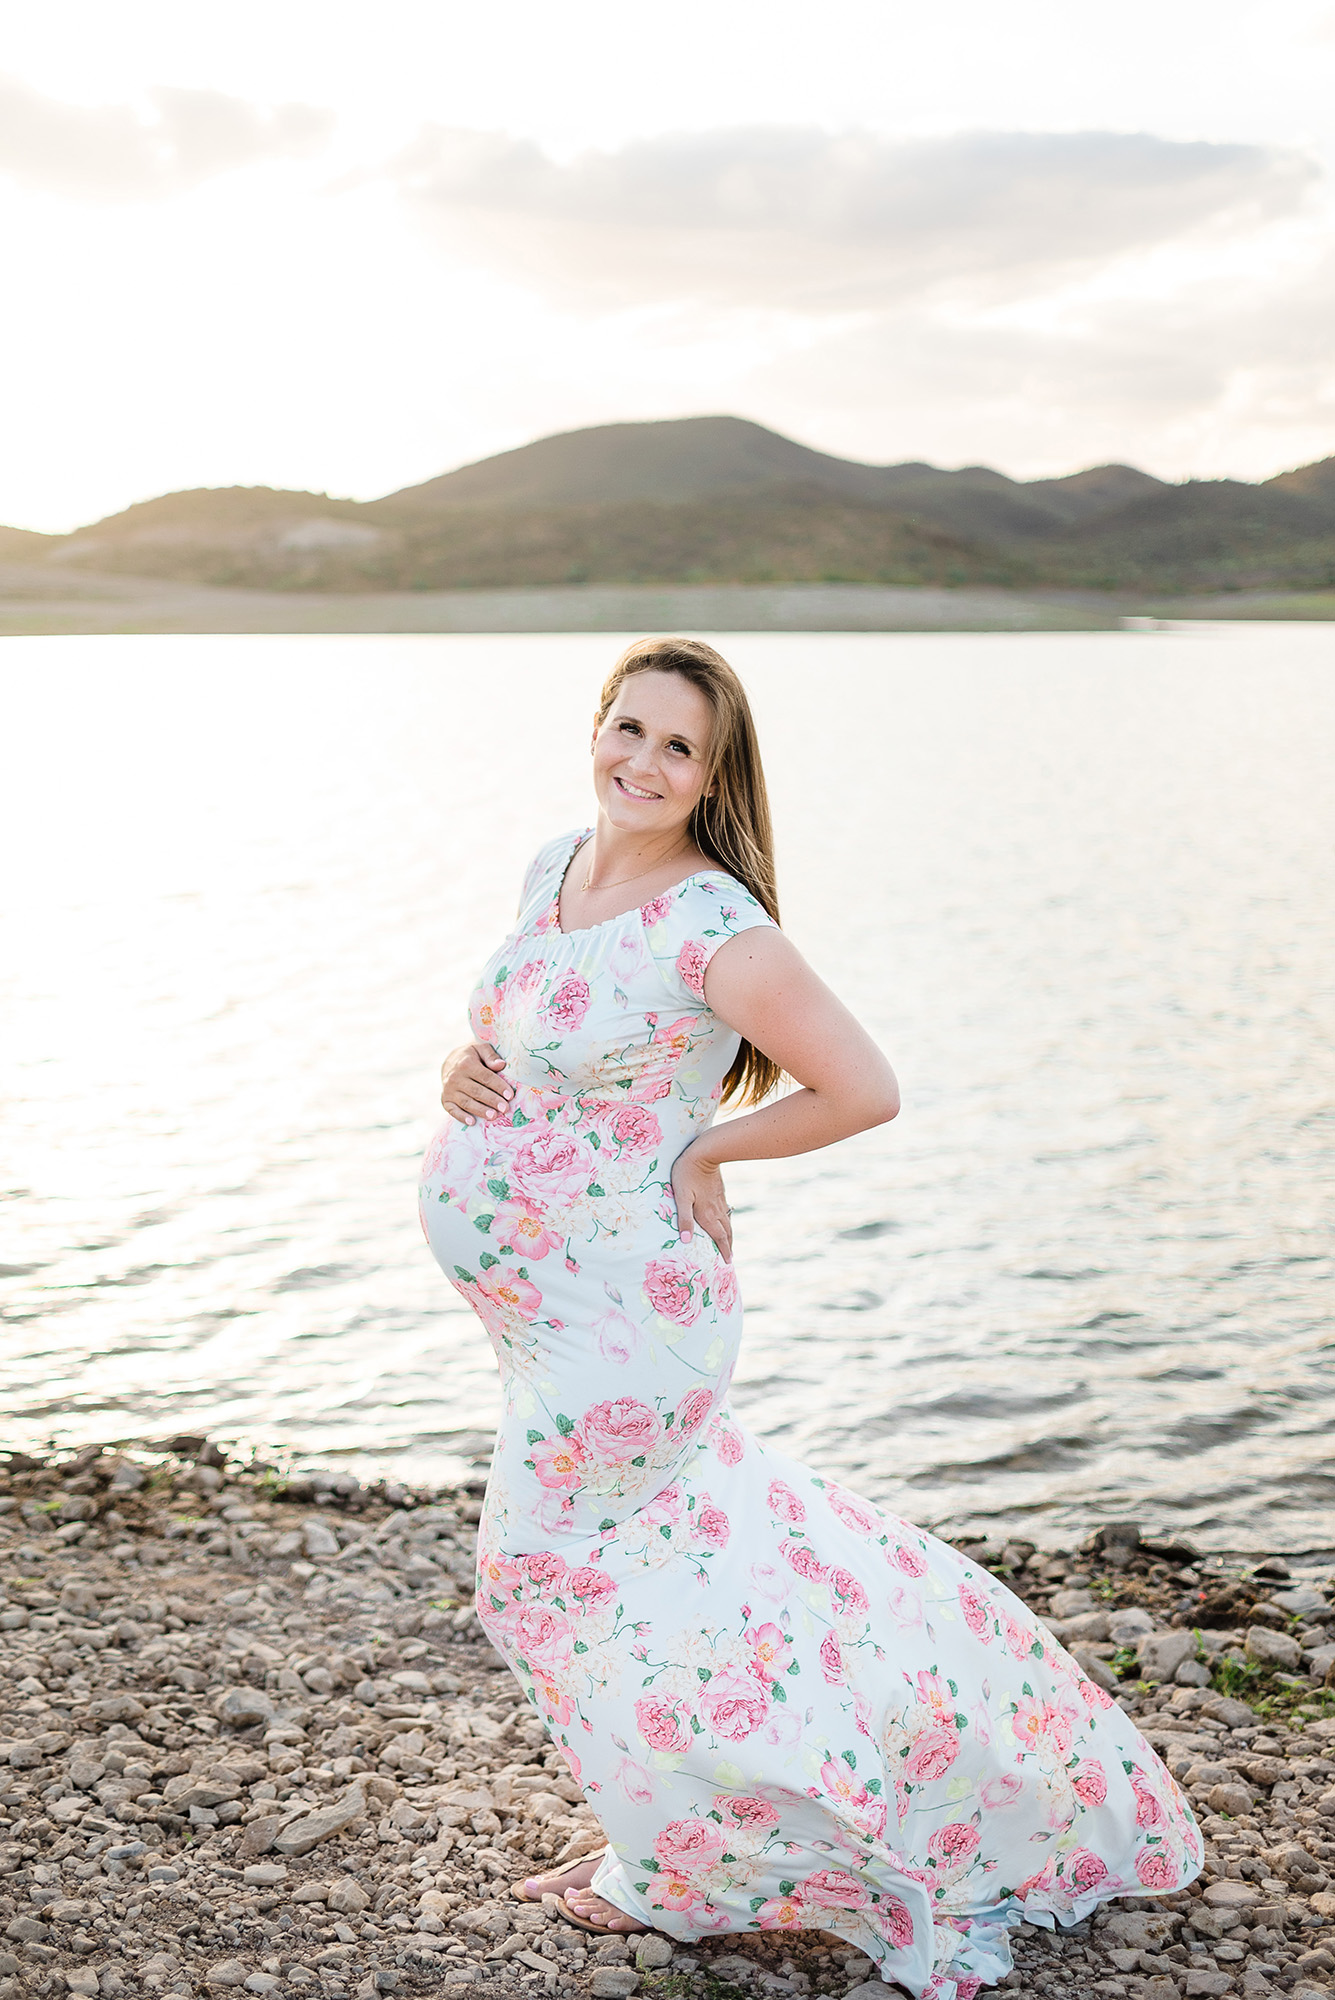 36 week pregnant woman wearing a blue floral dress for her lakeside maternity photo session